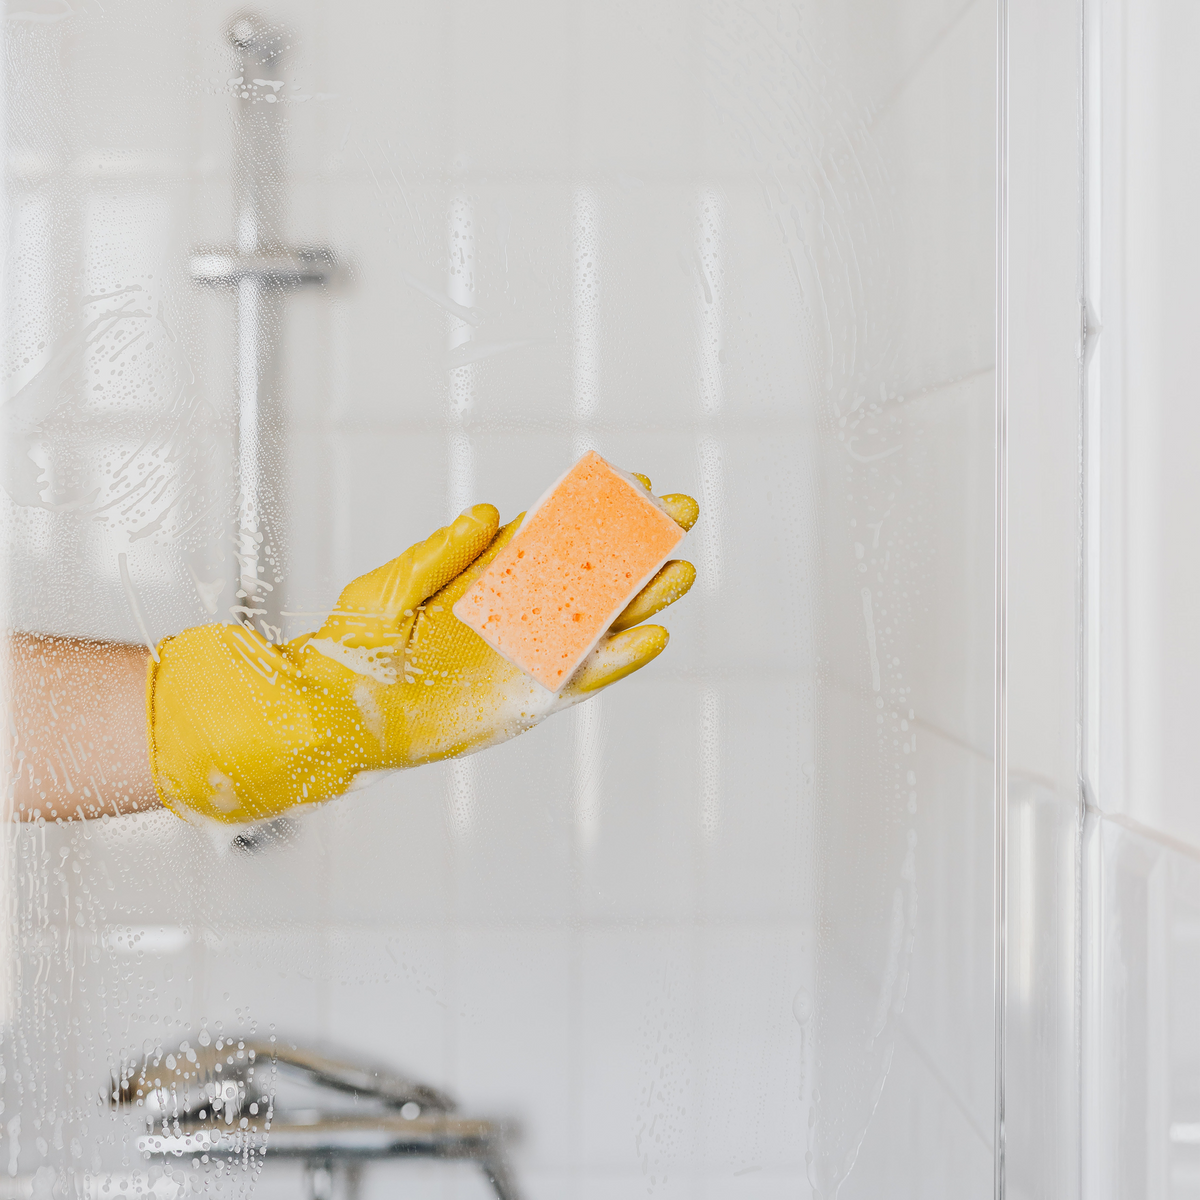 How to clean a shower and tips to keep it clean